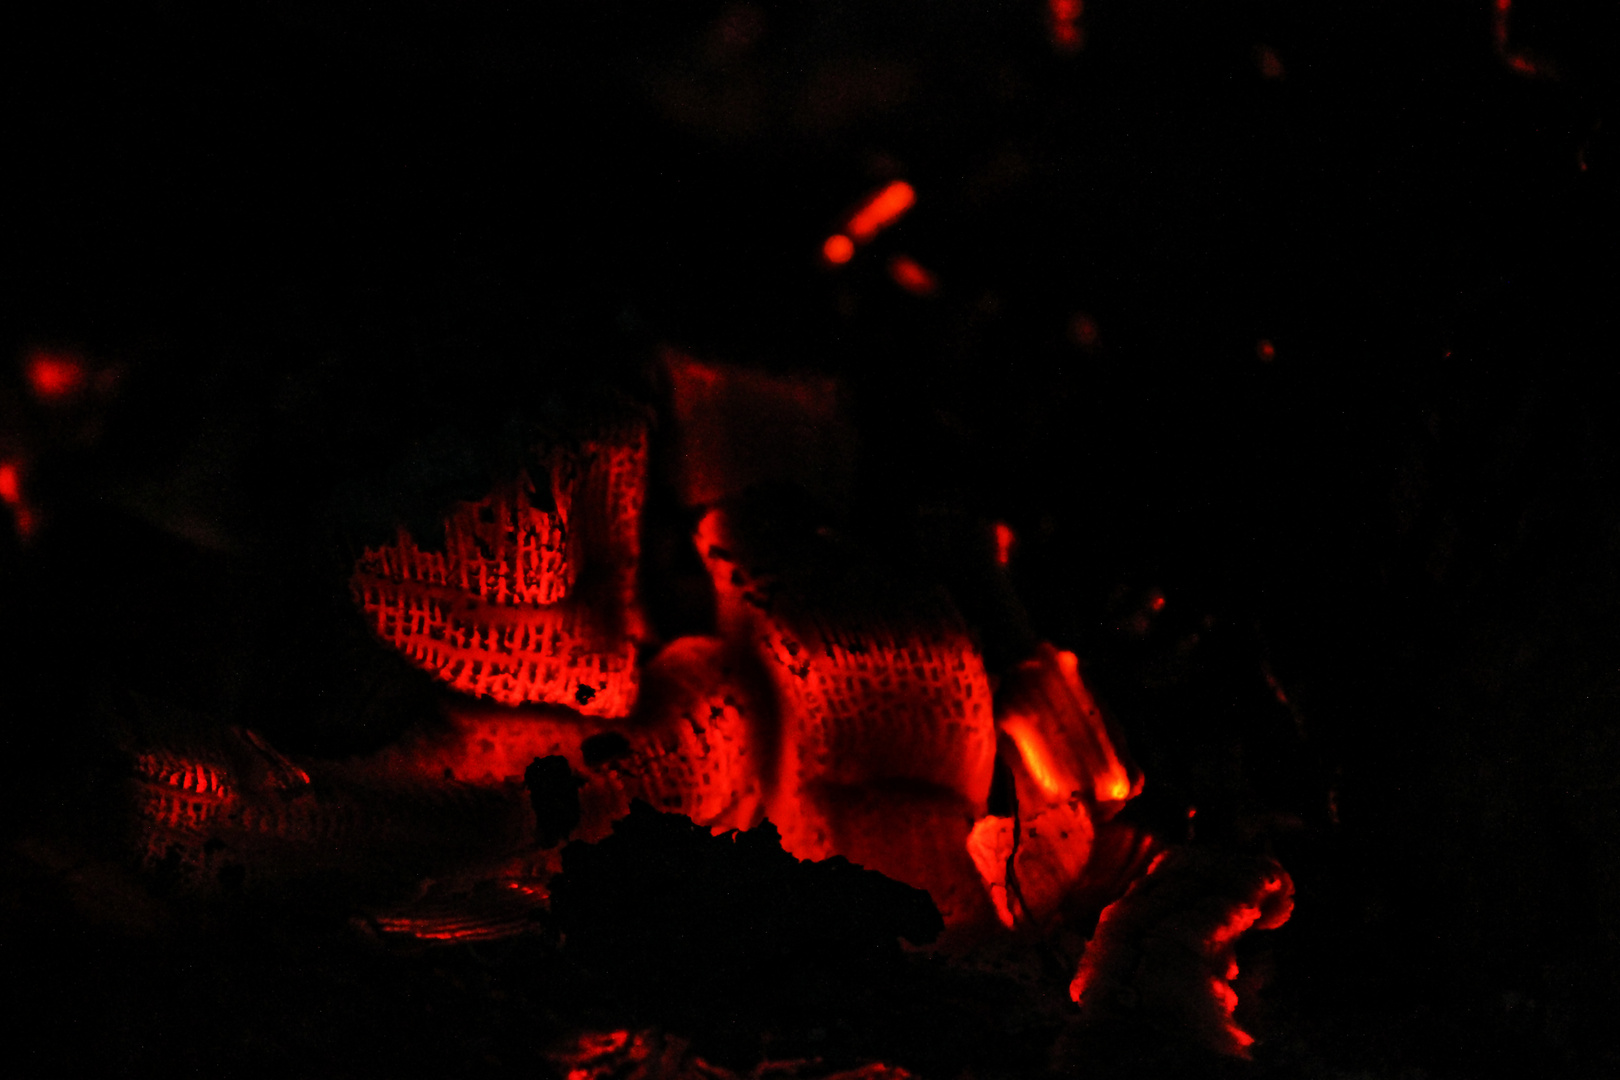 Glowing charcoal in a stove